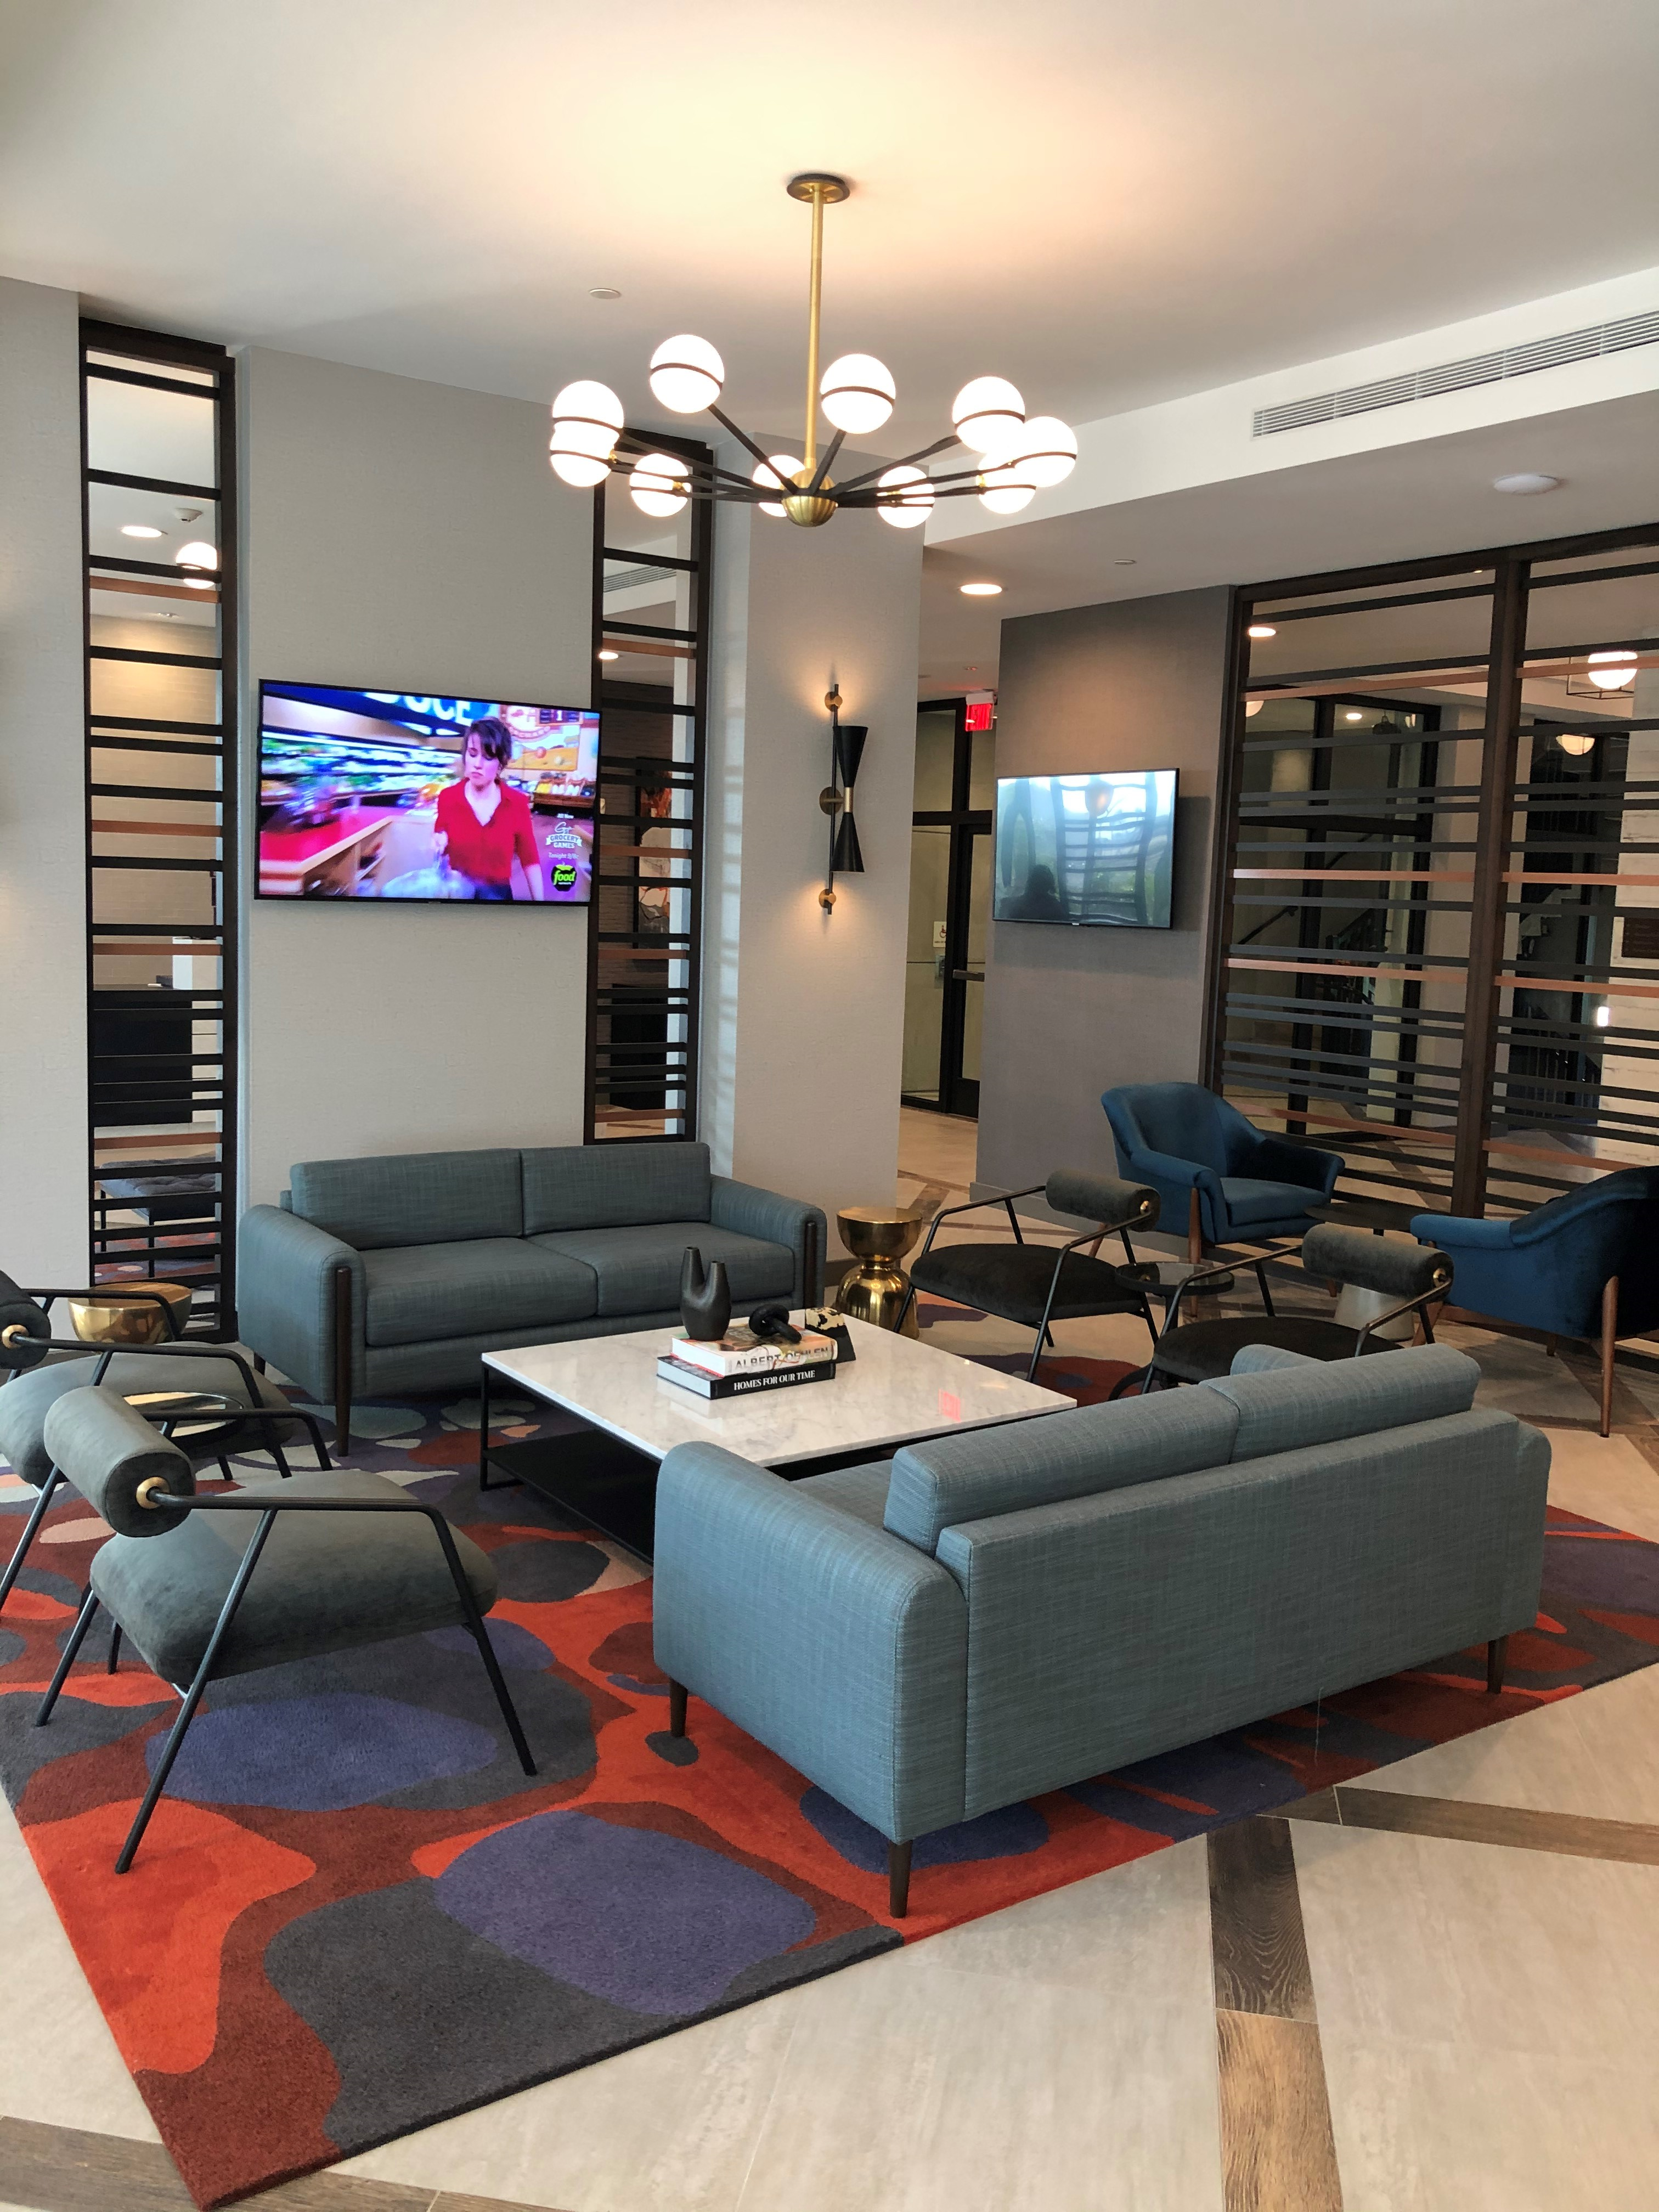 Travelers Hotel Group, Wednesday, October 23, 2019, Press release picture